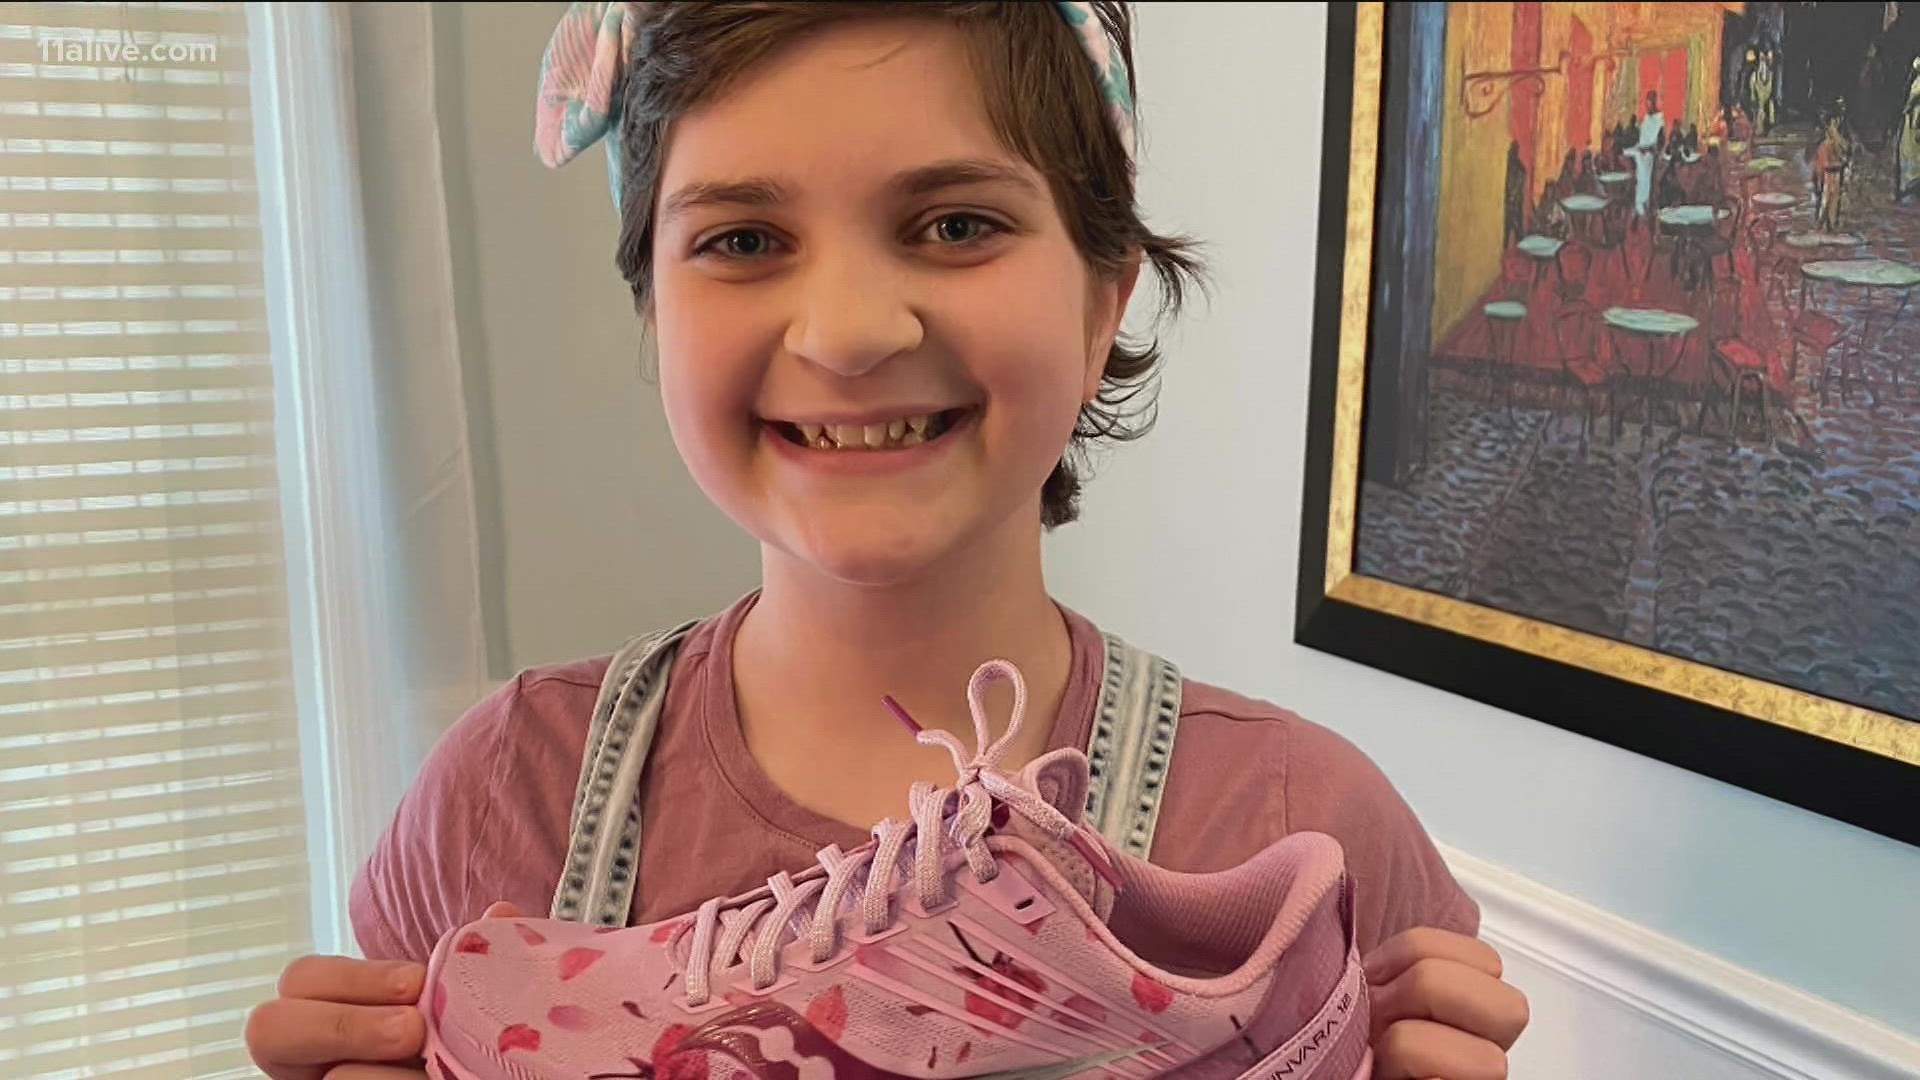 Lexy is one of 5 patients at Children's Healthcare of Atlanta selected to design a shoe representing their journey.